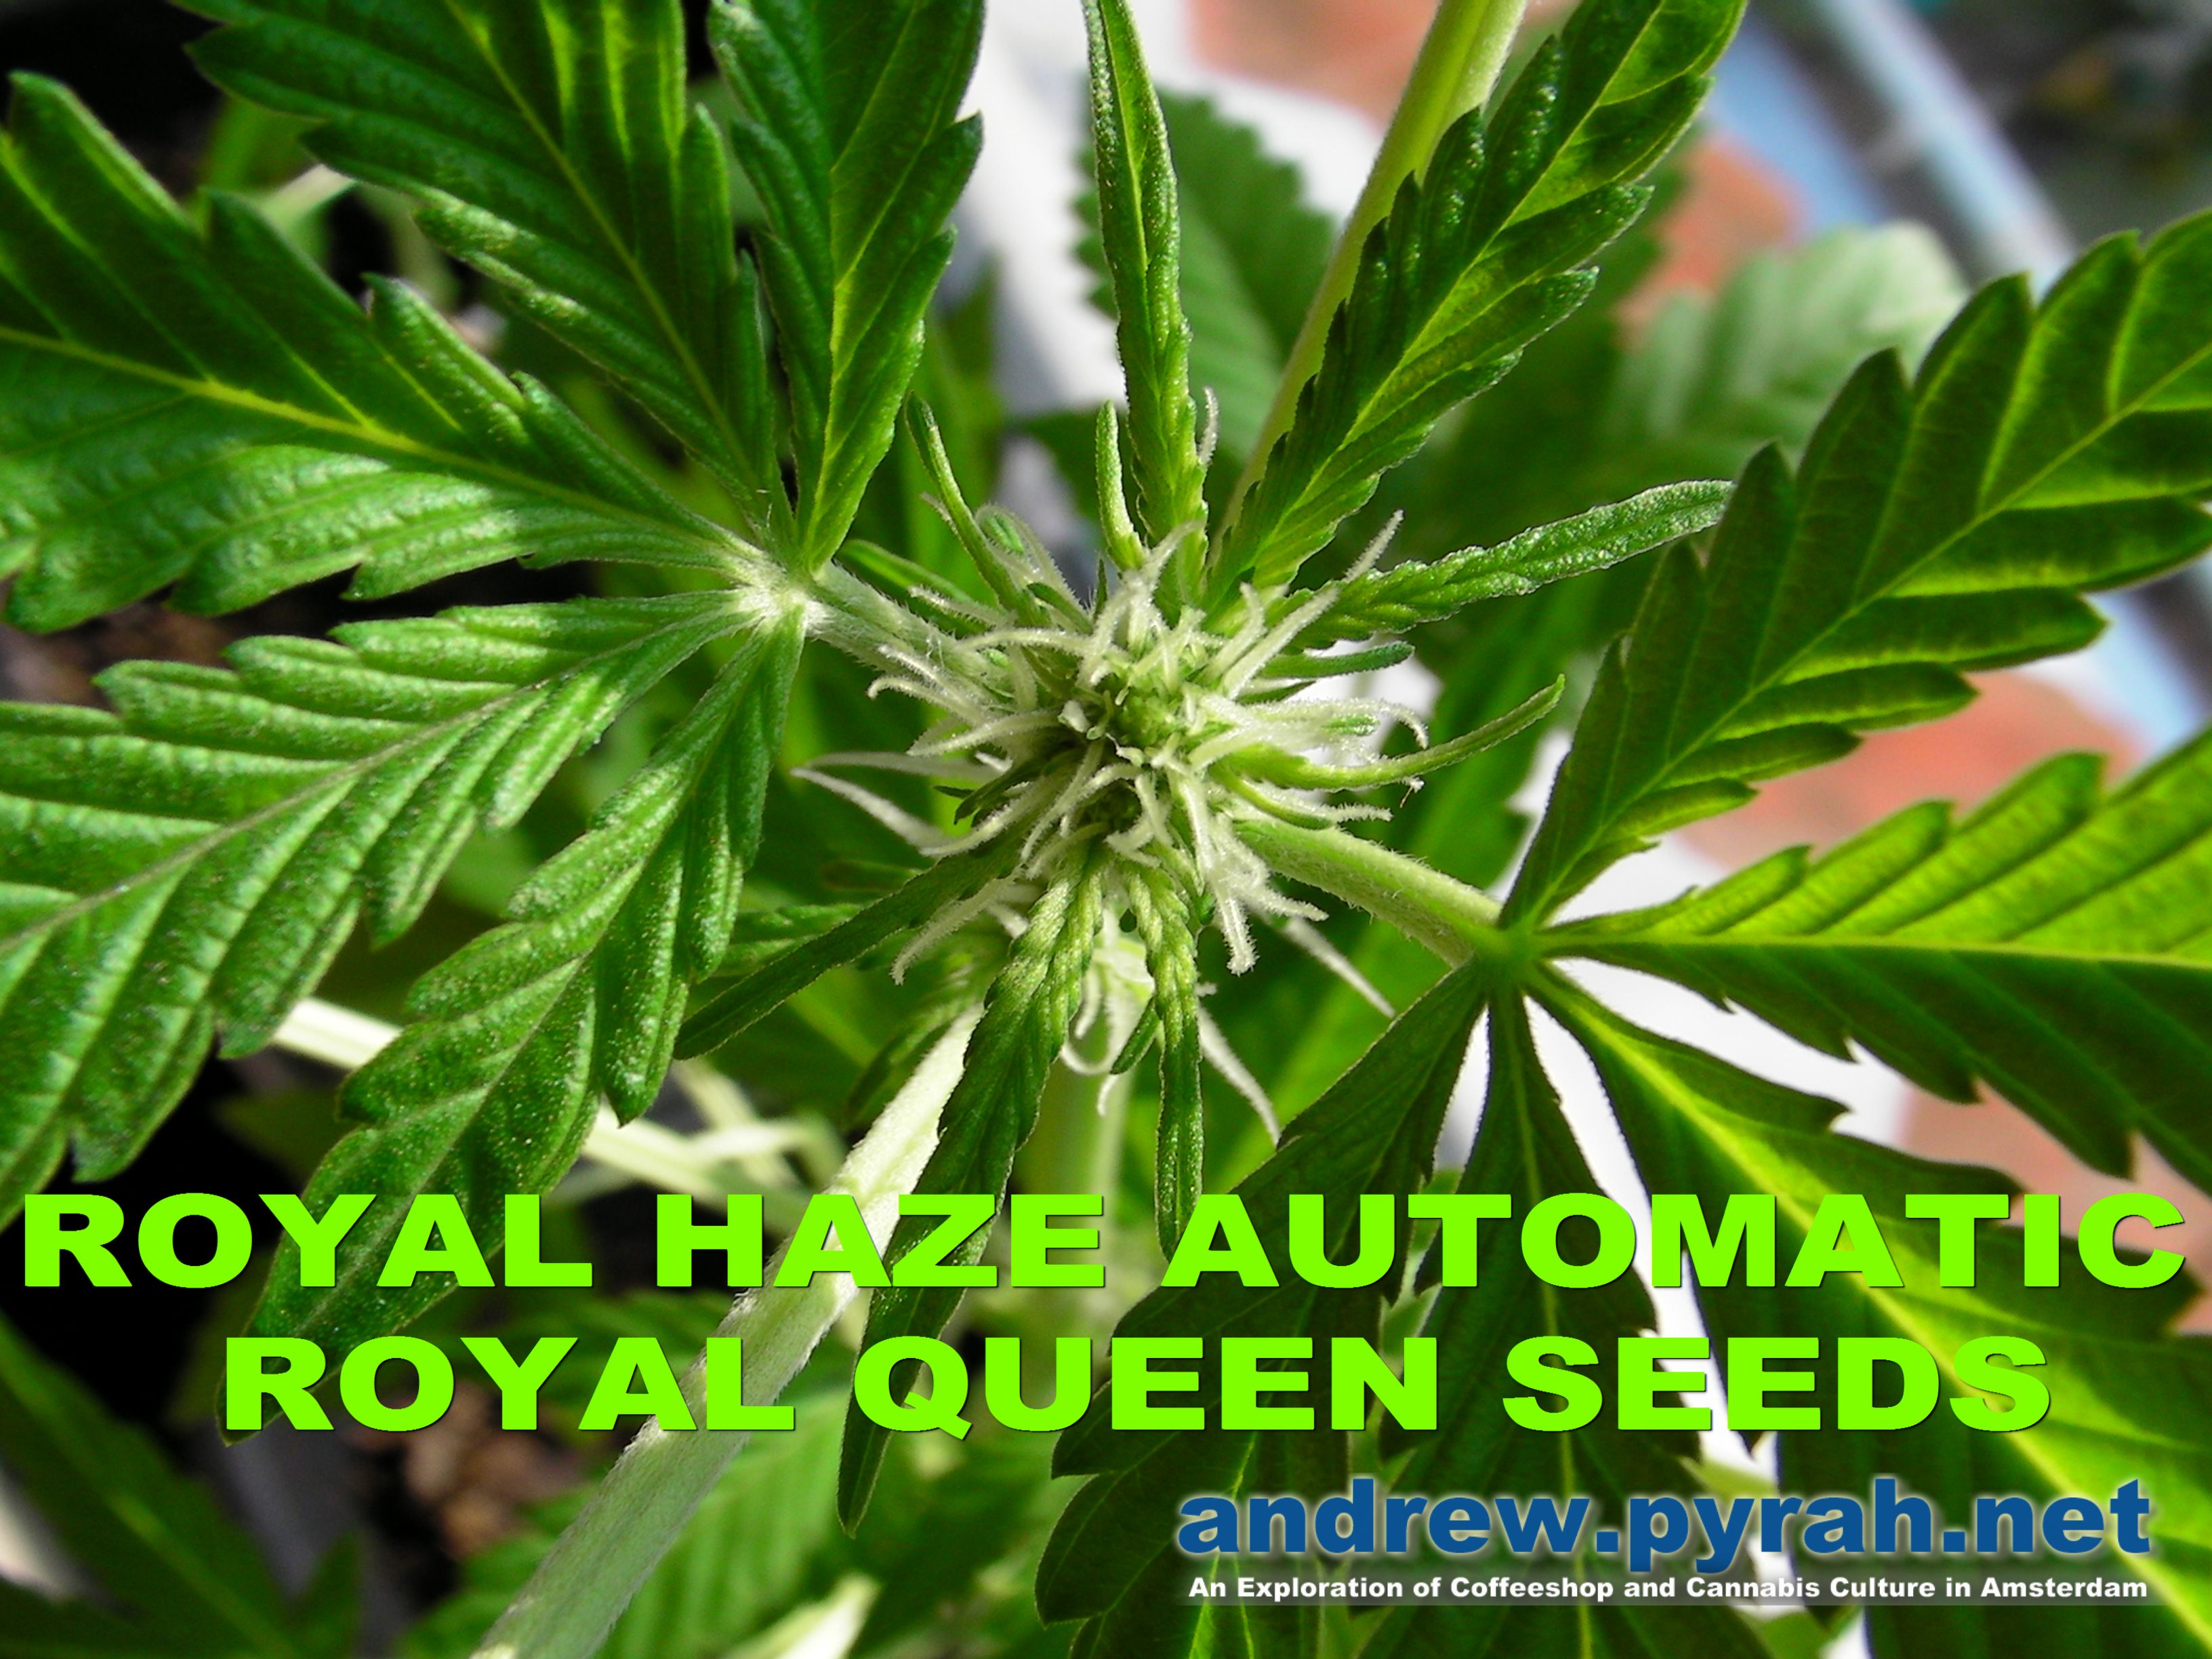 Royal Haze Automatic THE GROW Part 3 Flowering Begins